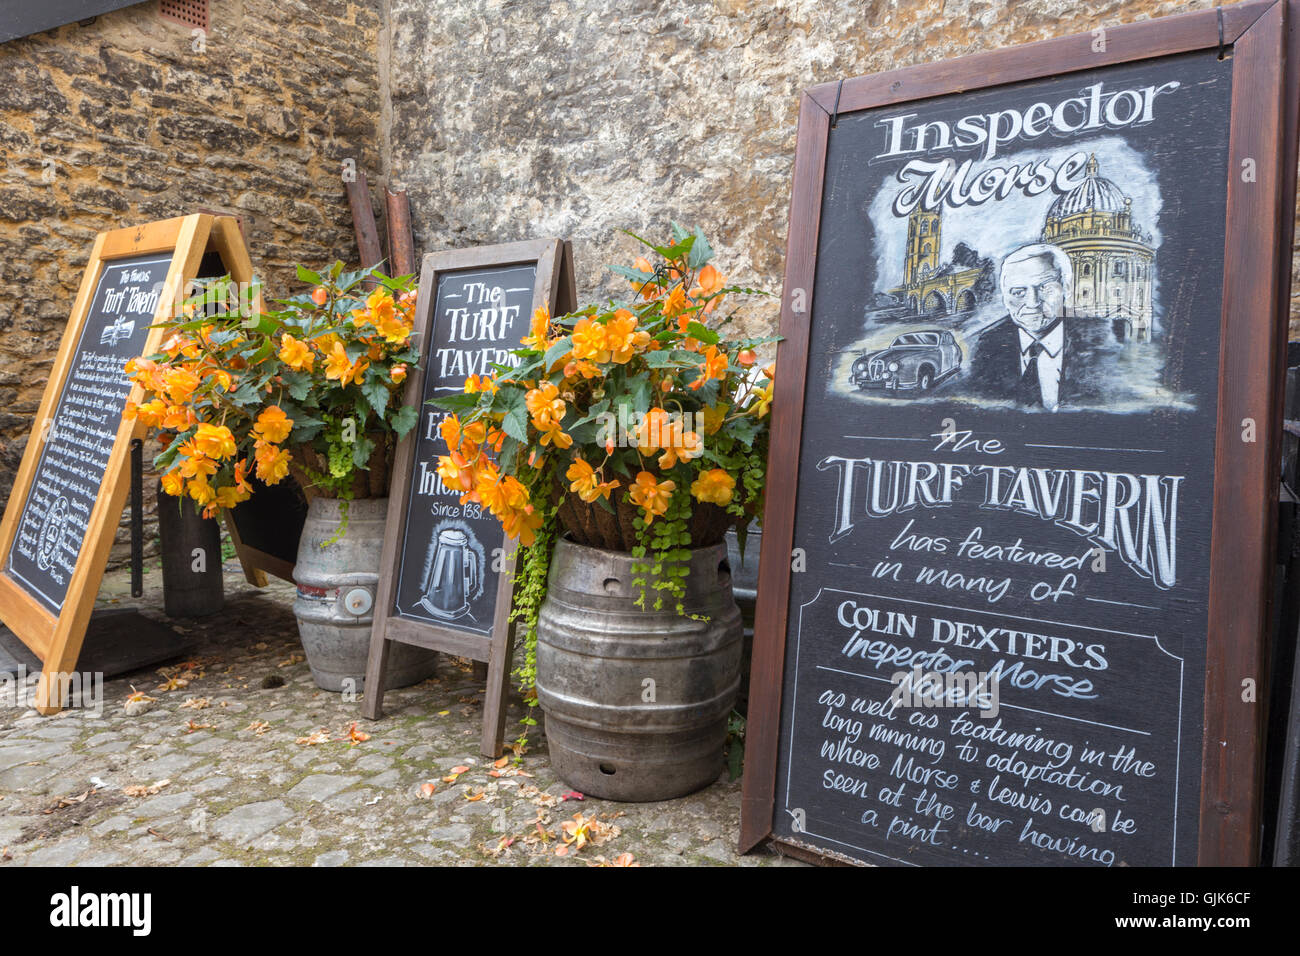 Display boards at the Turf Tavern, Oxford remembering the Inspector Morse TV series that filmed in the Turf Tavern, England, UK Stock Photo